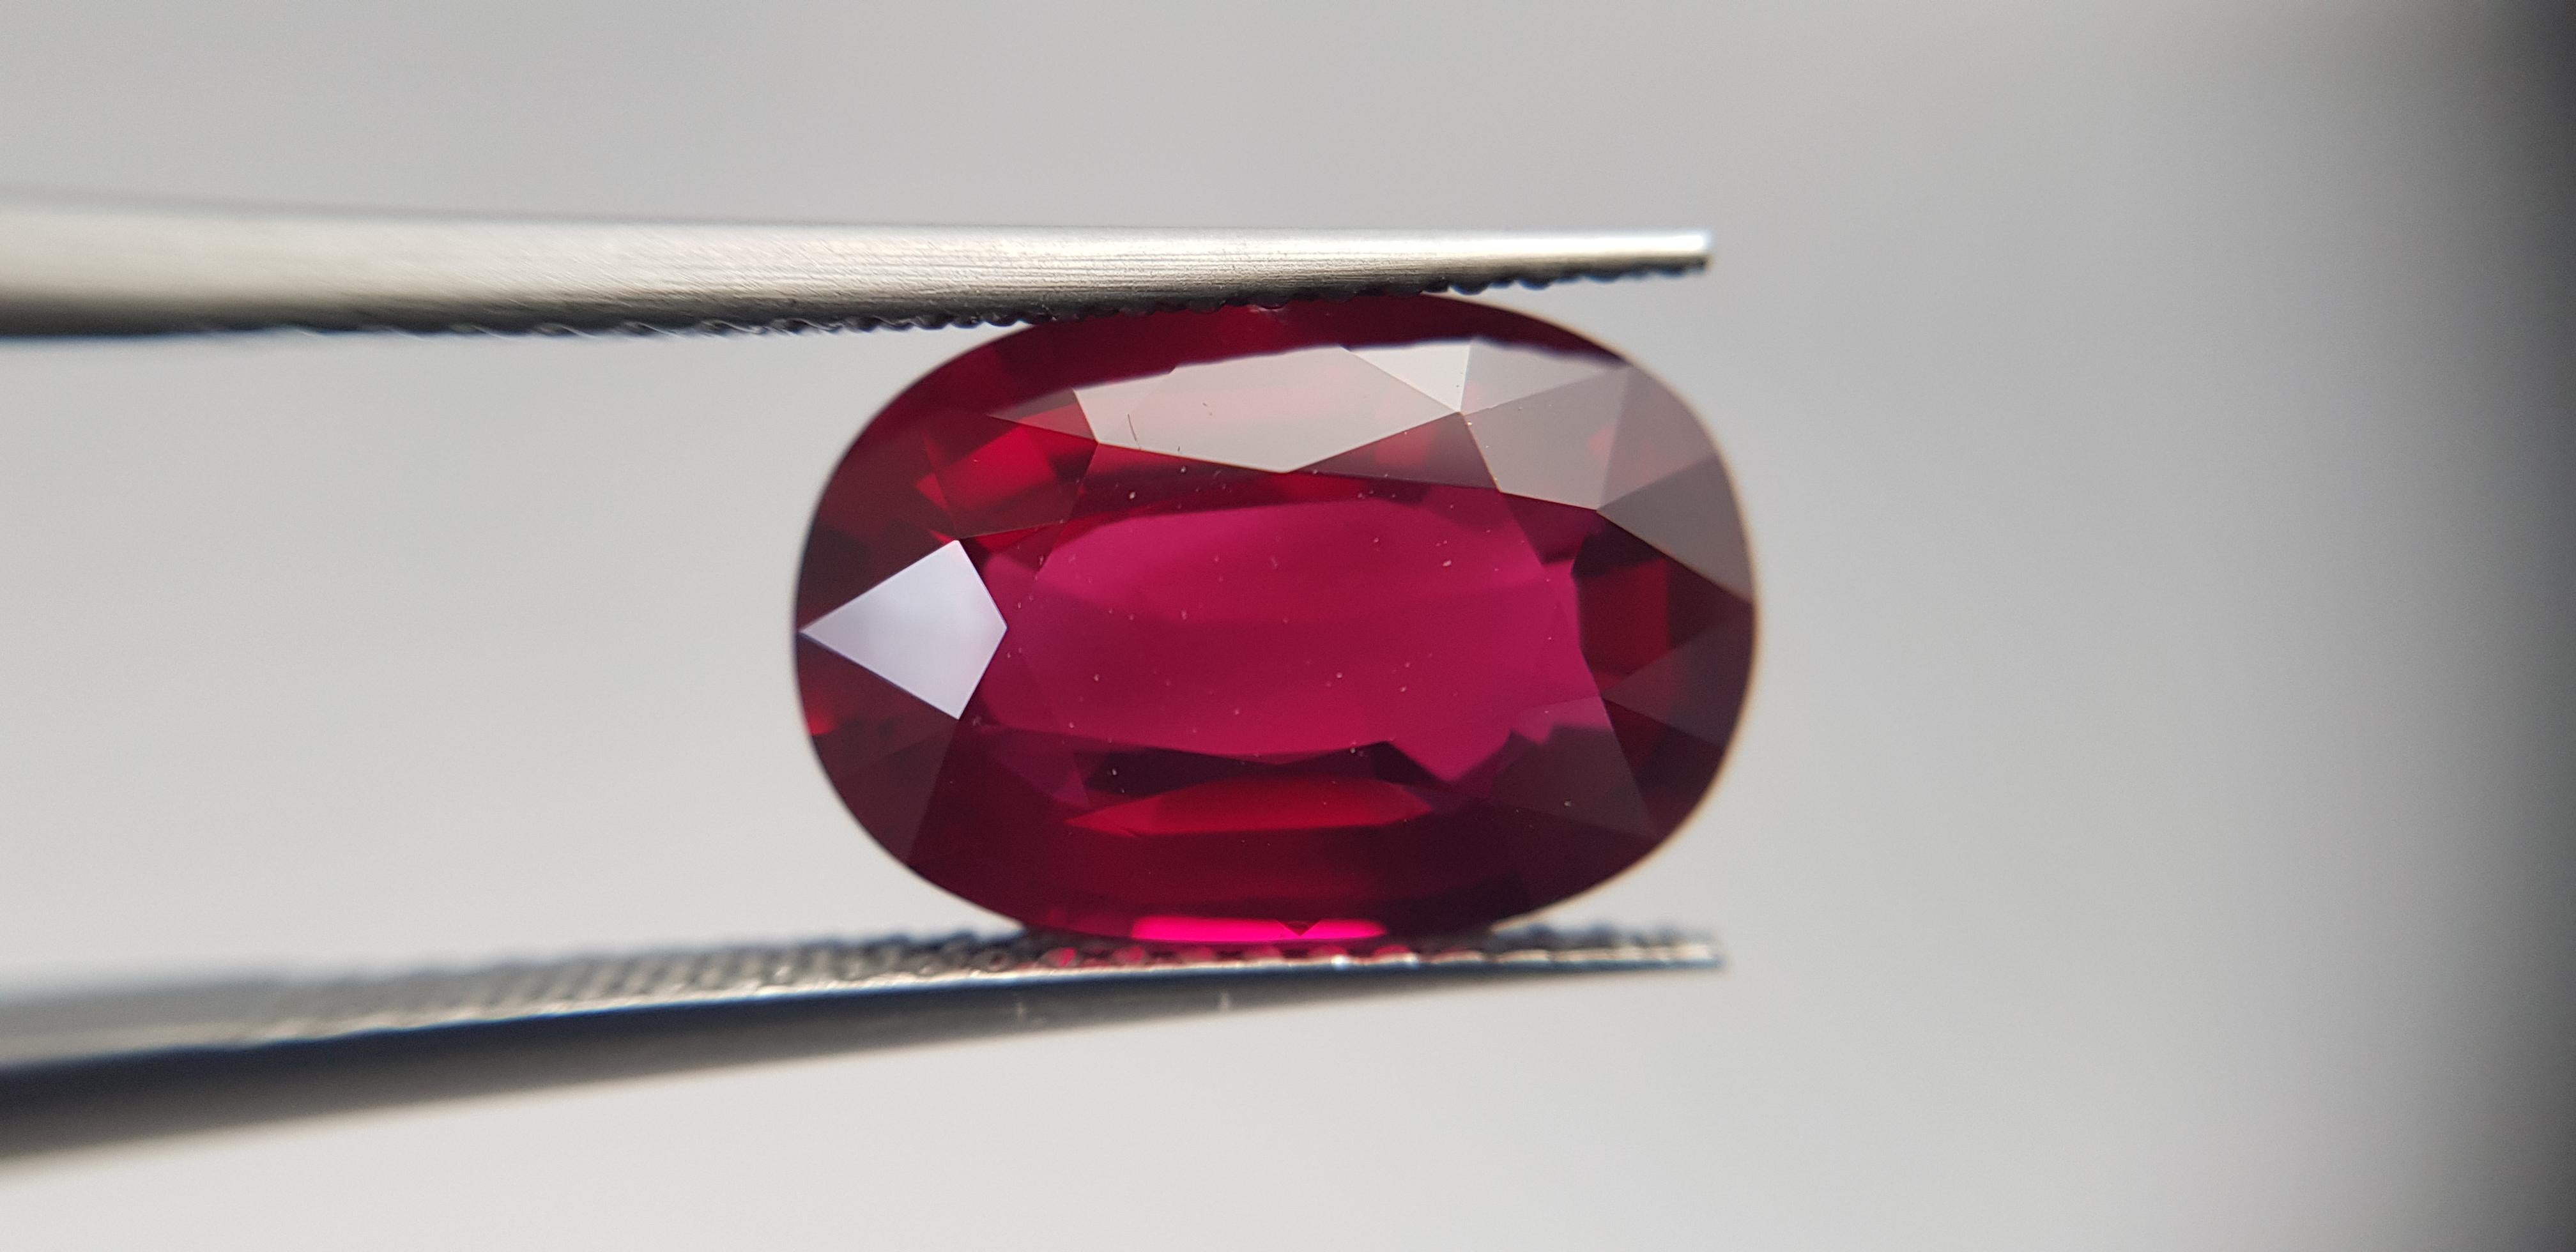 This 5.03ct unheated certified 'Pigeons Blood' Red Ruby is a gemstone of very high and fine quality. 

With a carat weight of above 5 carat, it is a rare find in natural stones to have a large sized gem like this. As well as this, the stone exhibits